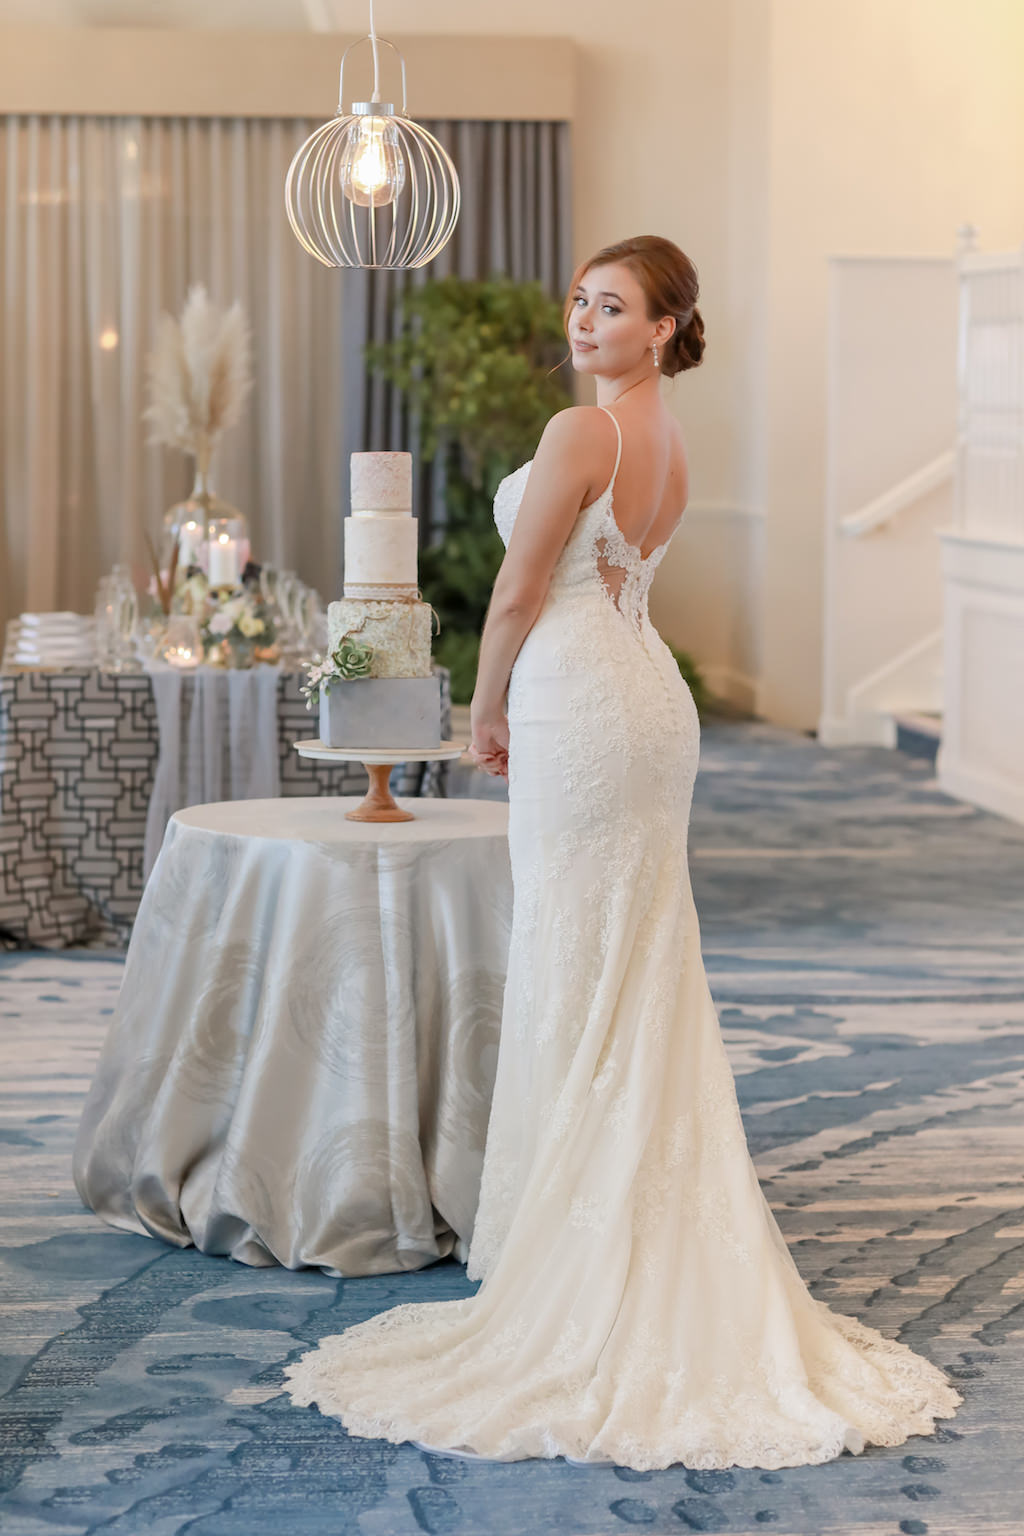 Bride Portrait in Fitted Lace and Strap Wedding Dress with Lace and Button Back, Four Tier White and Blue Wedding Cake on Round Table with Silver Tablecloth | St. Petersburg Photographer Lifelong Photography Studios | Tampa Bay Wedding Dress Shop Truly Forever Bridal | St. Petersburg Historic Hotel Ballroom The Don Cesar | Cake The Artistic Whisk | Rentals Over the Top Rental Linens